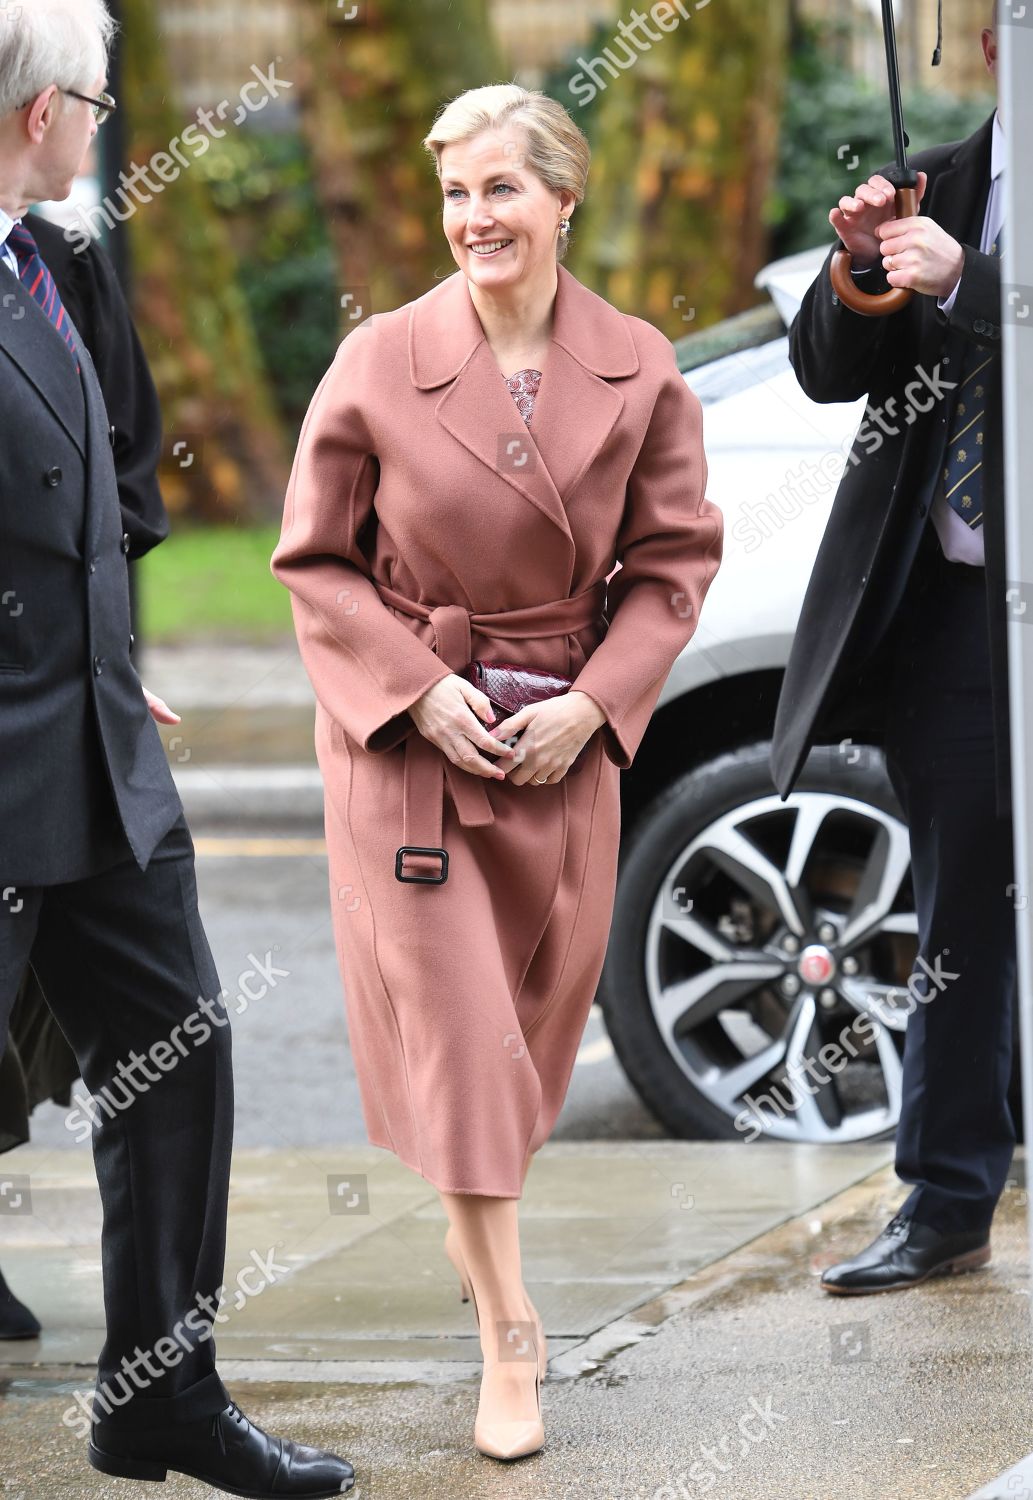 sophie-countess-of-wessex-opens-a-new-studio-for-central-school-of-ballet-london-uk-shutterstock-editorial-10568616d.jpg